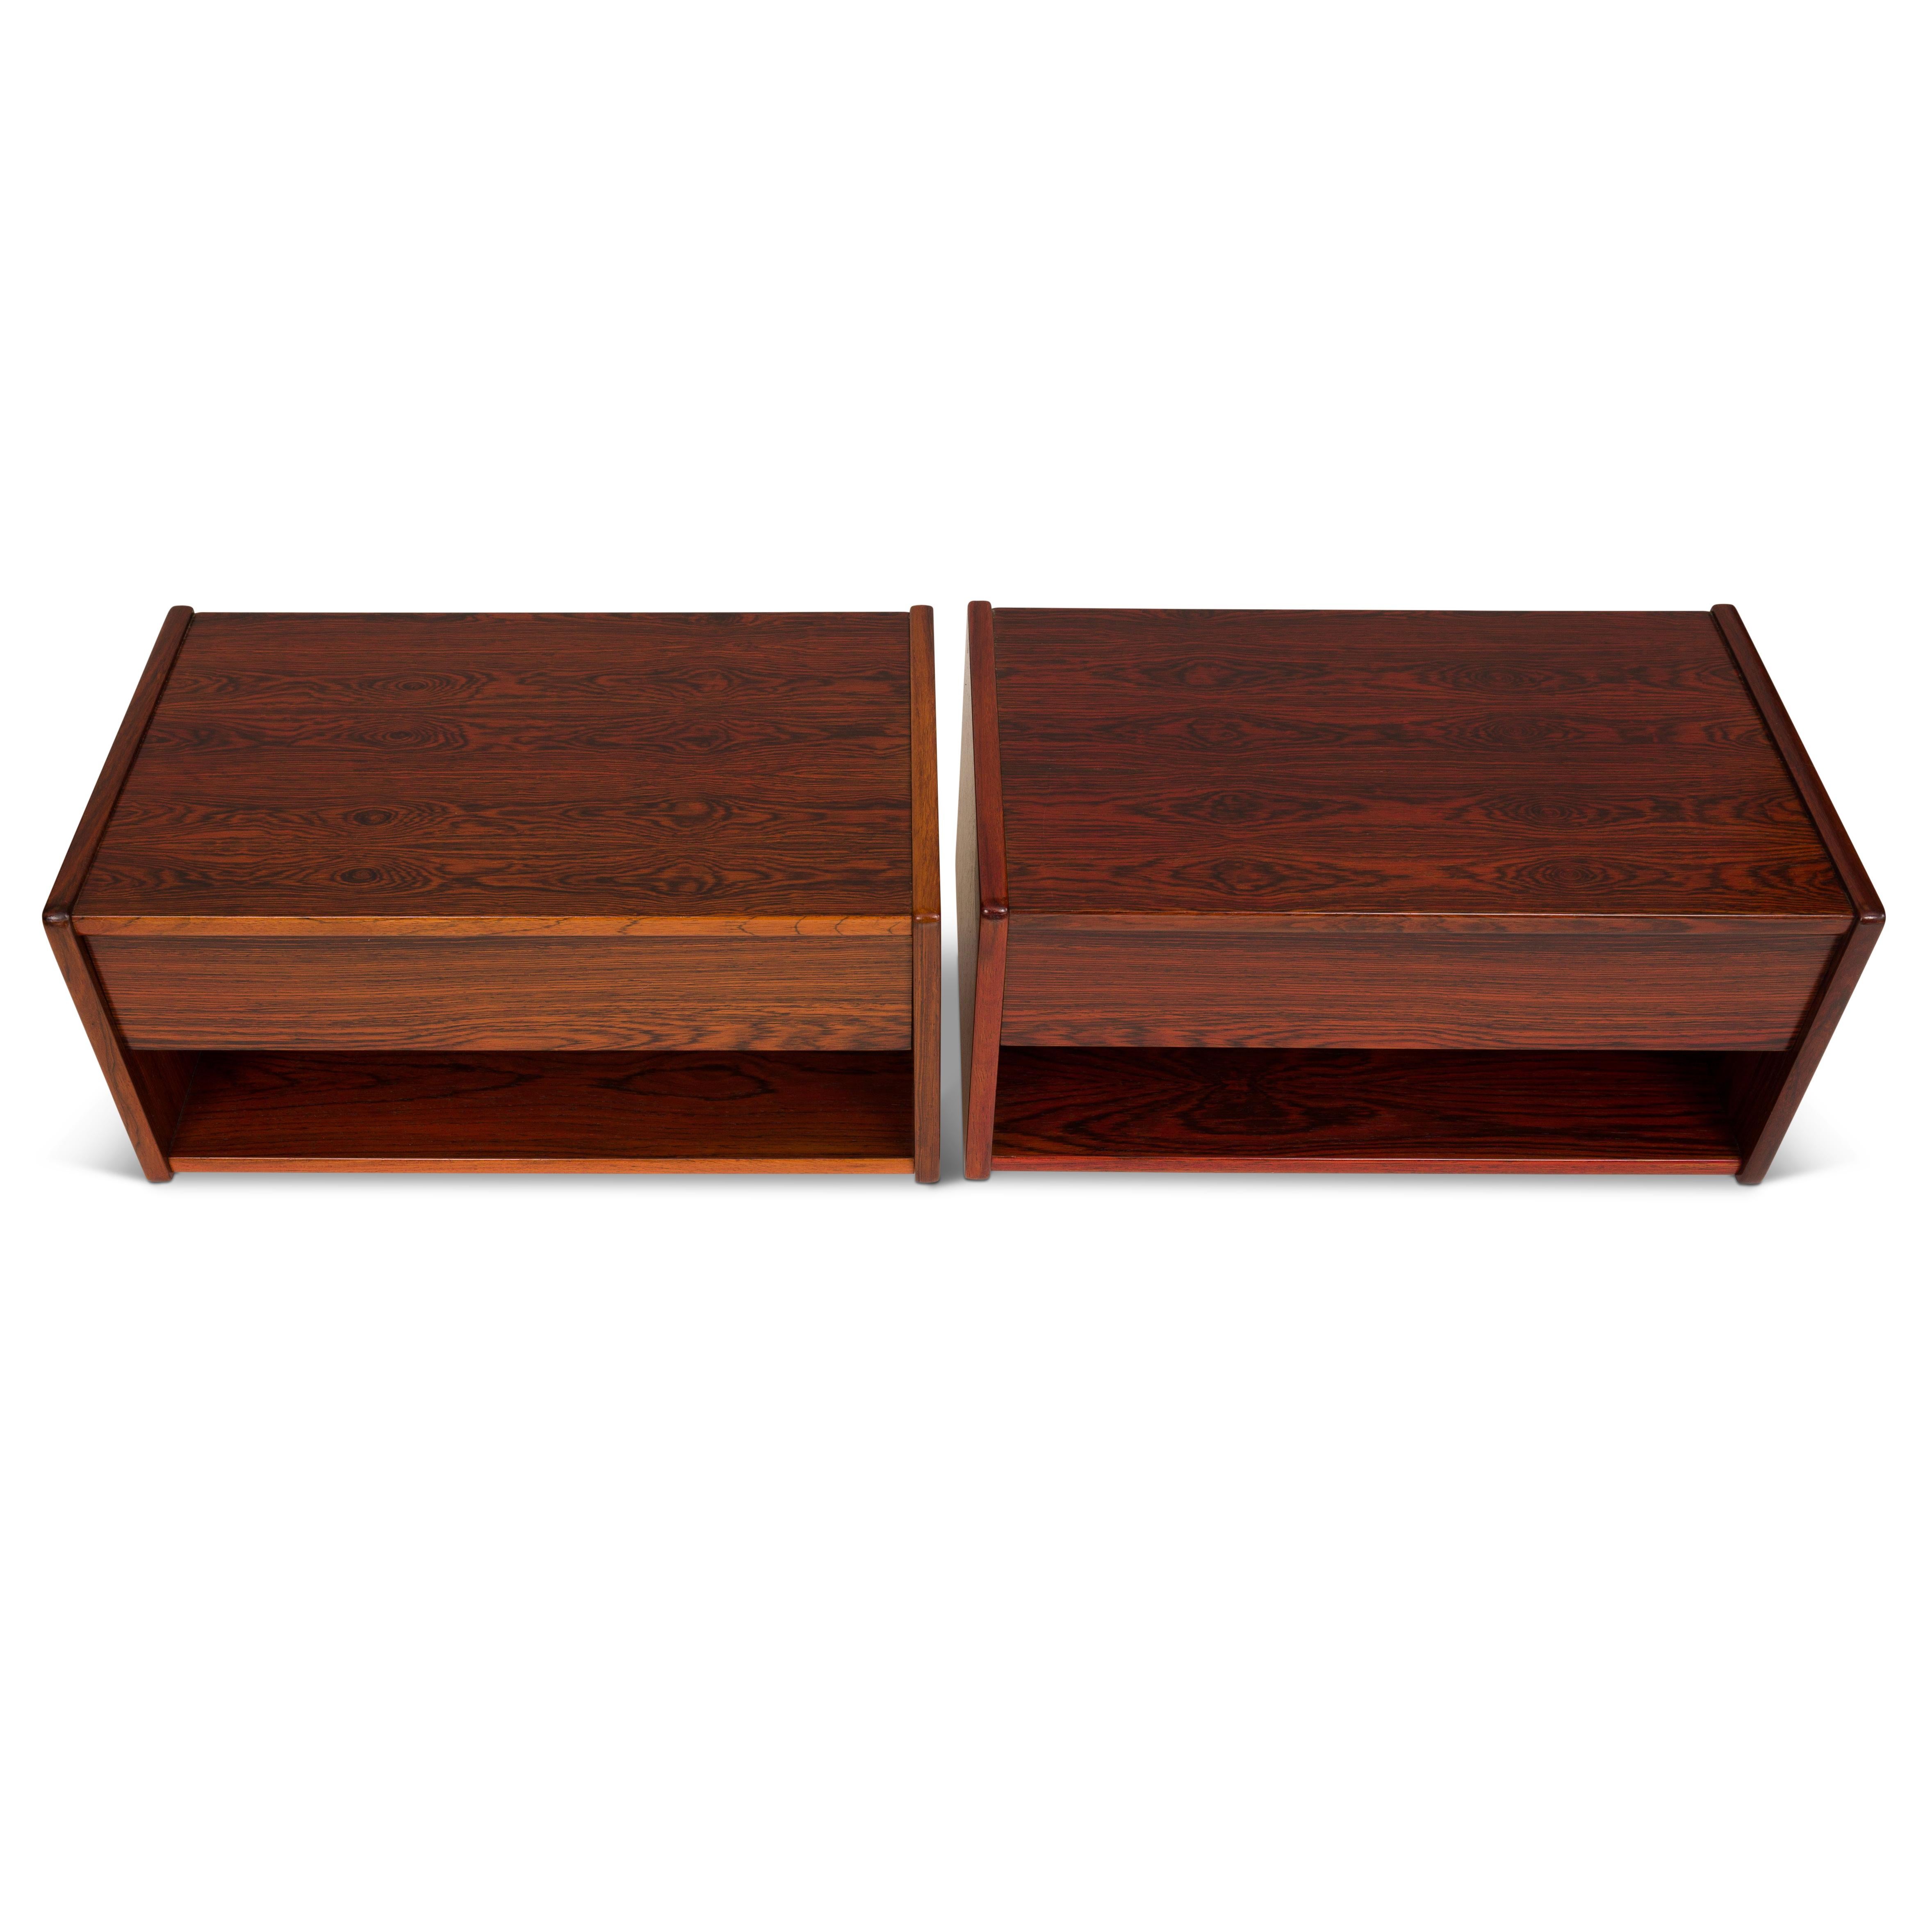 Vintage Danish Mid-Century Modern Floating Rosewood Nightstands In Good Condition For Sale In Emeryville, CA